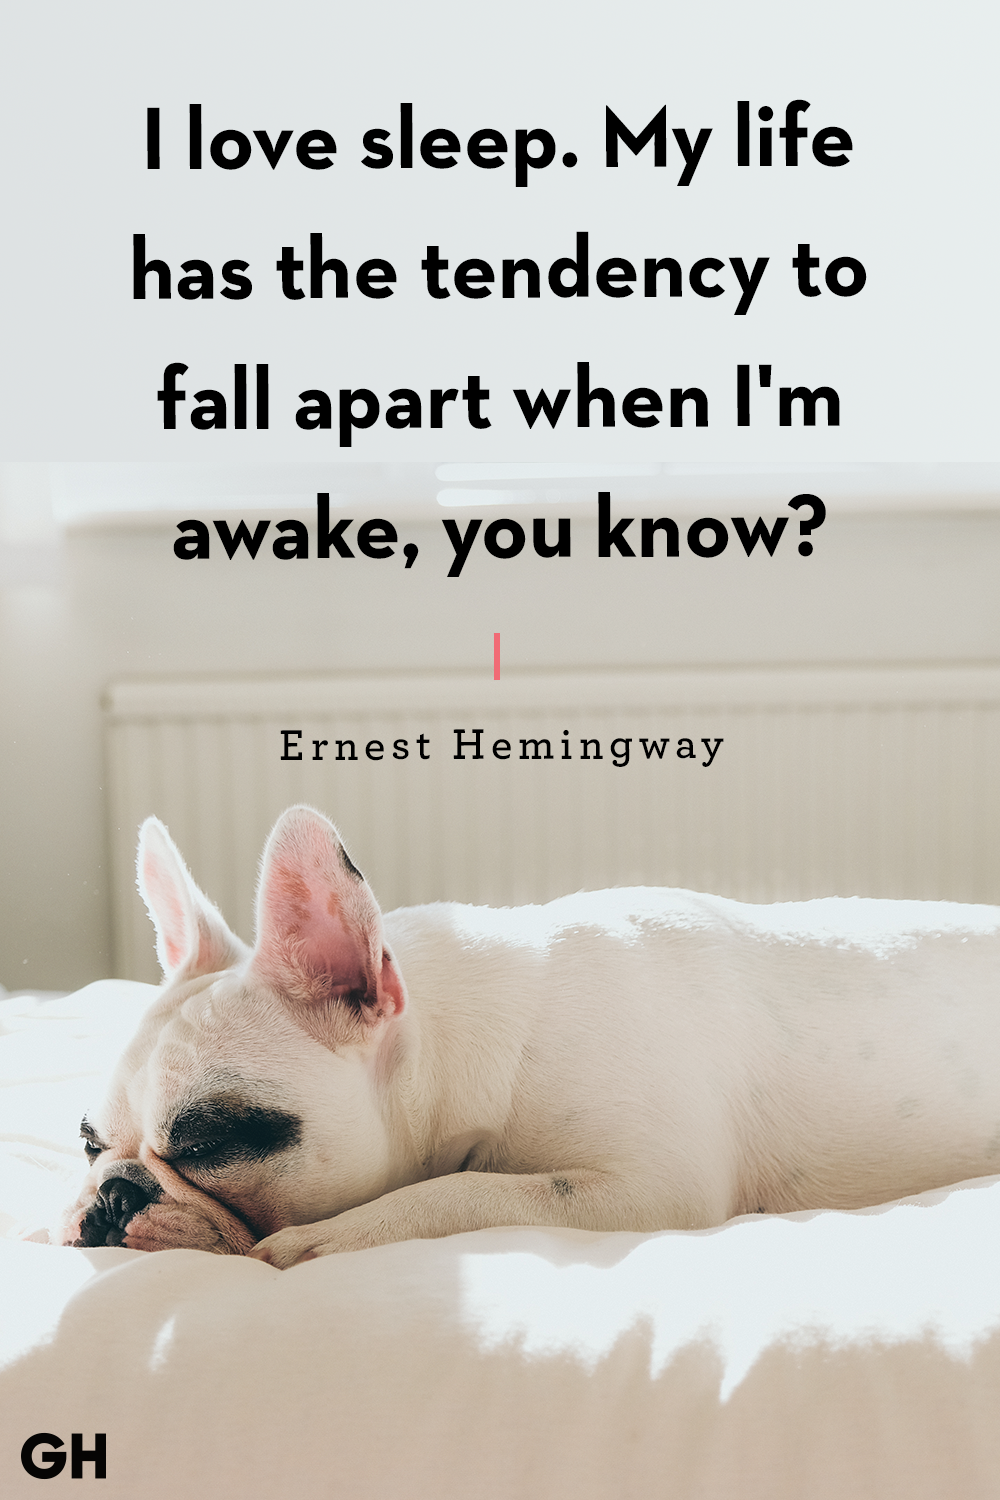 i love sleep. my life has the tendency to fall apart when i’m awake, you know. ernest hemingway